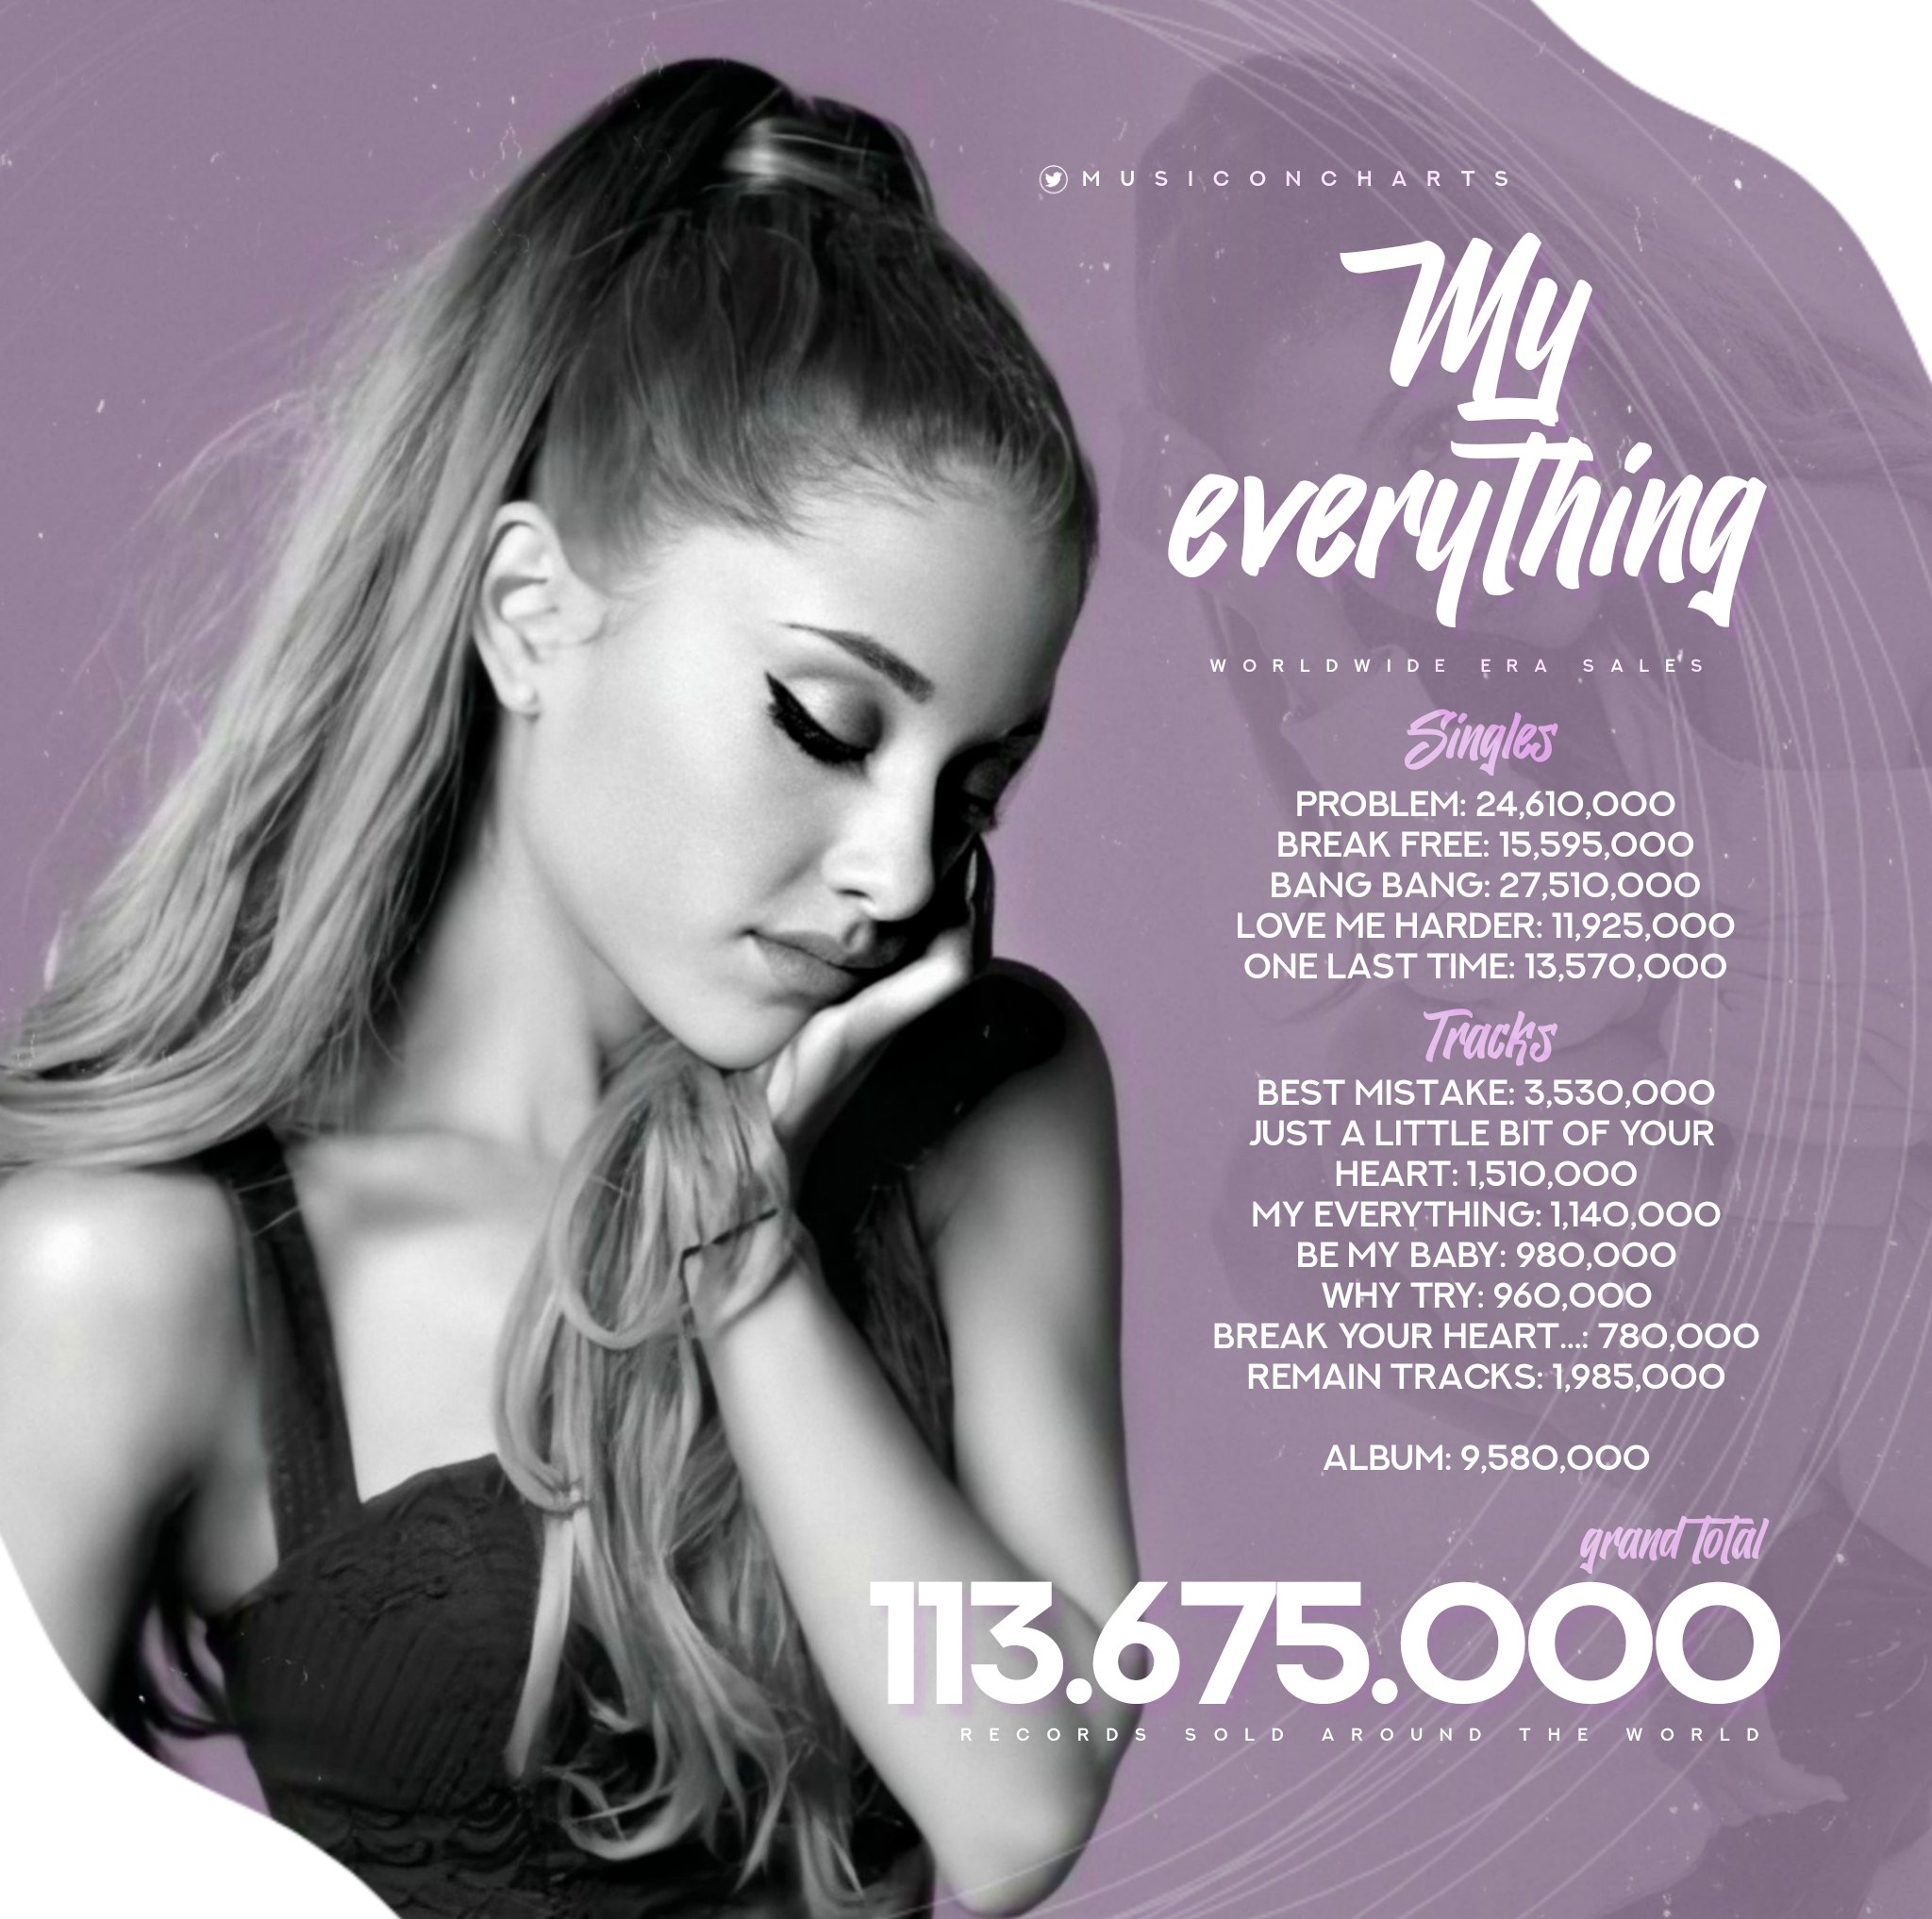 Music On Charts Arianagrande S My Everything Era Has Surpassed 113 Million Records Sold Worldwide It S Her Best Selling Record And One Of The Most Successful Of All Time T Co Jeoixitaxa